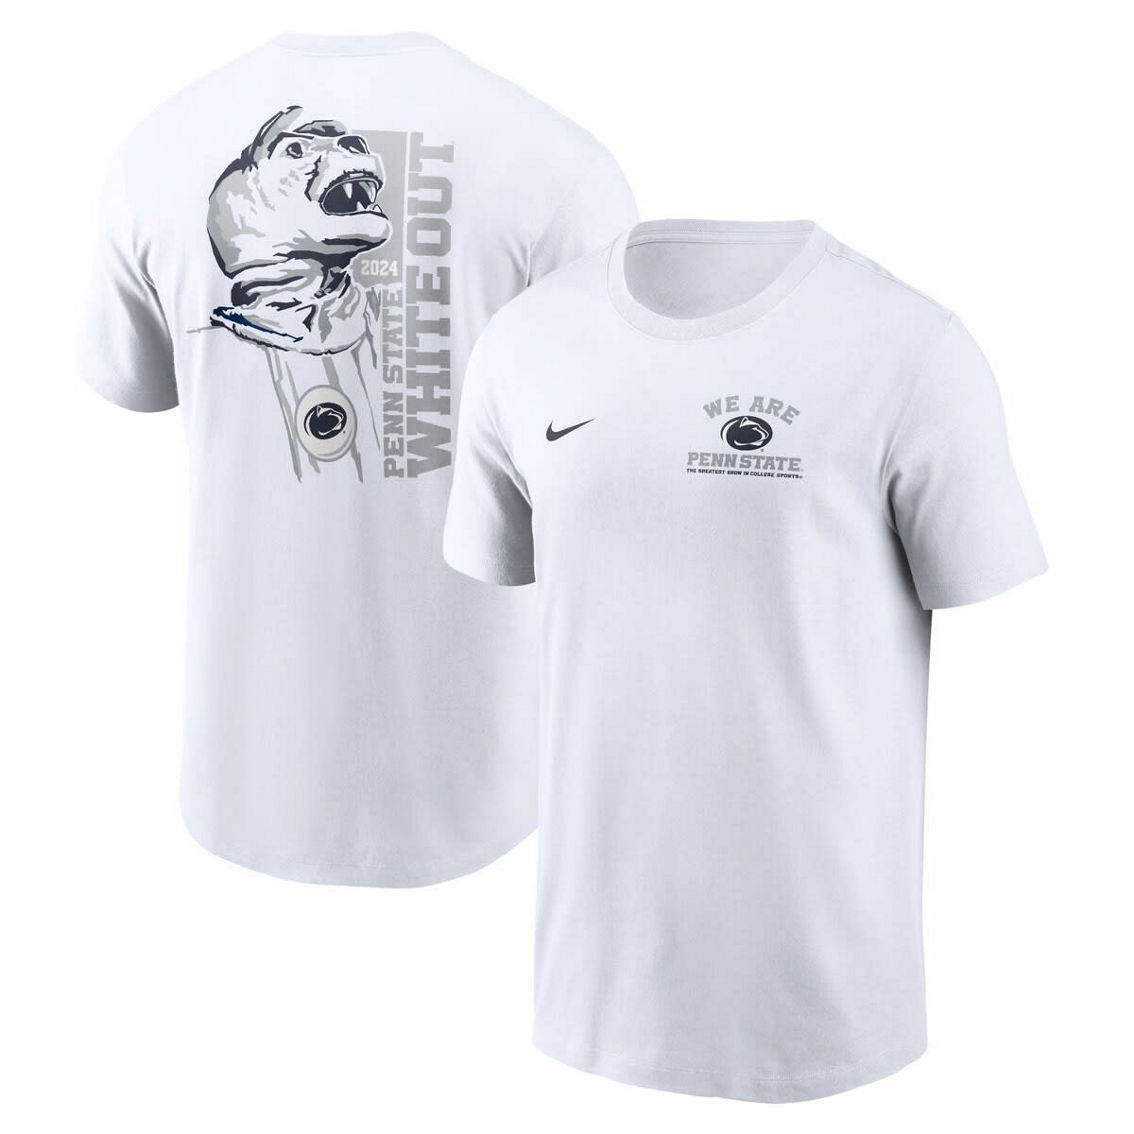 Nike Men's White Penn State Nittany Lions 2024 White Out T-Shirt - Image 2 of 4